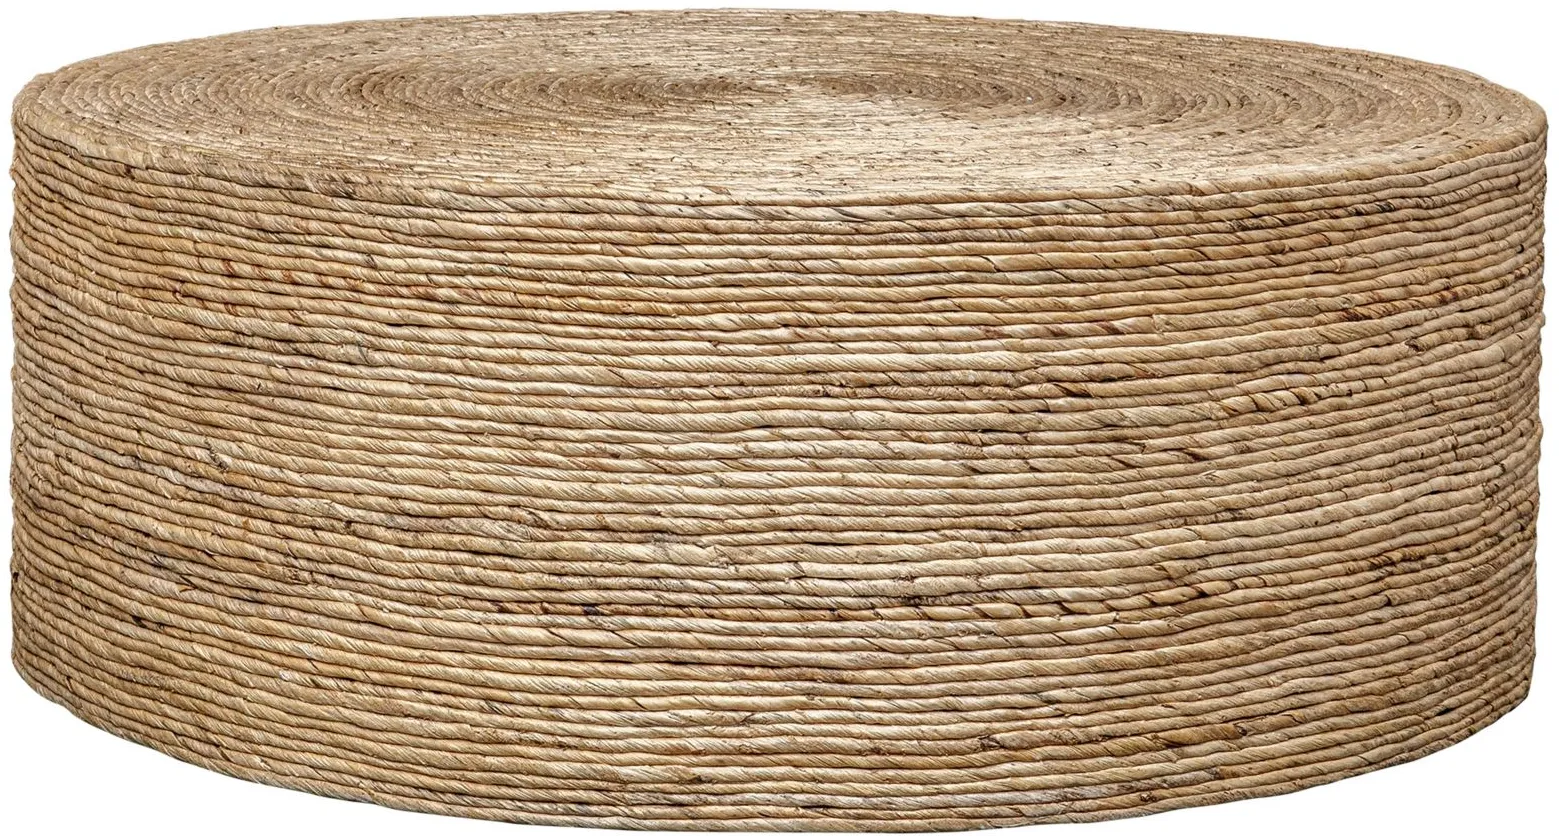 Rora Round Coffee Table in Natural by Uttermost